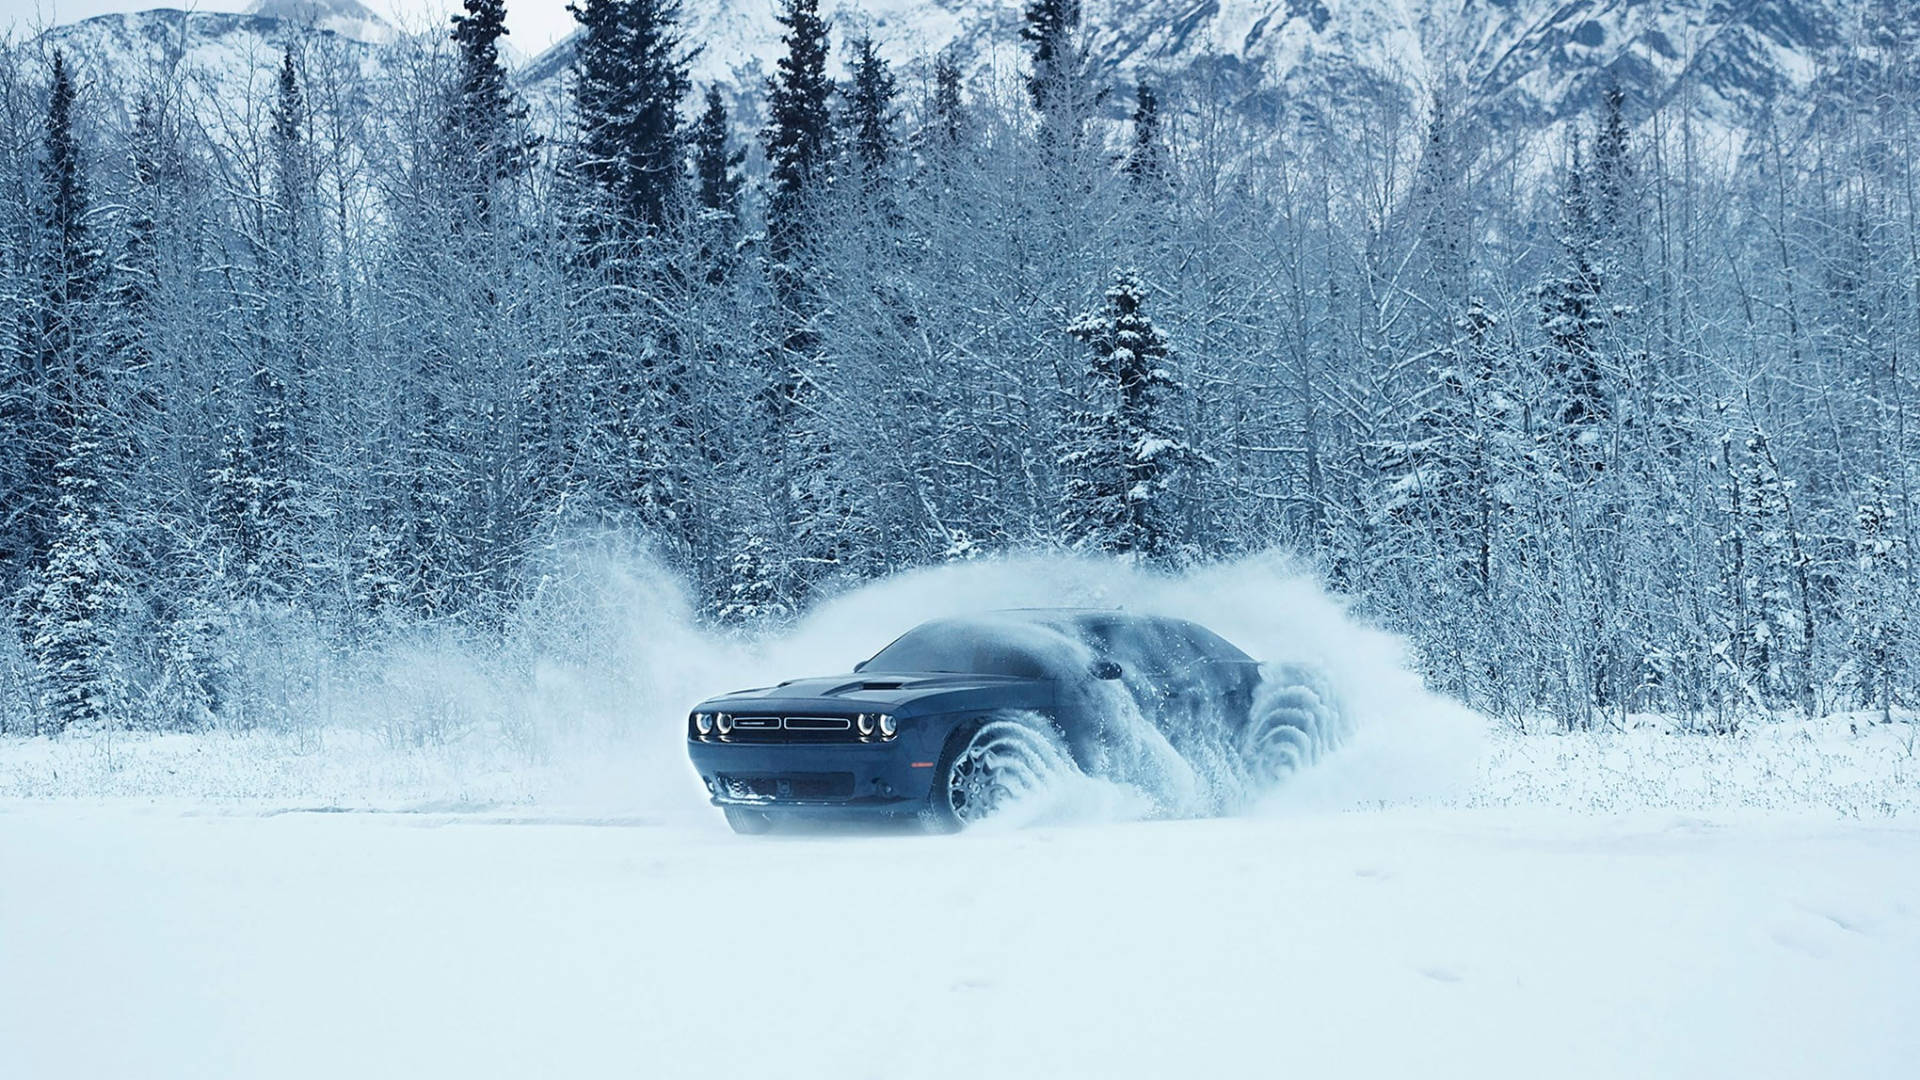 Snowy Covering A Blue Dodge Challenger Wallpaper